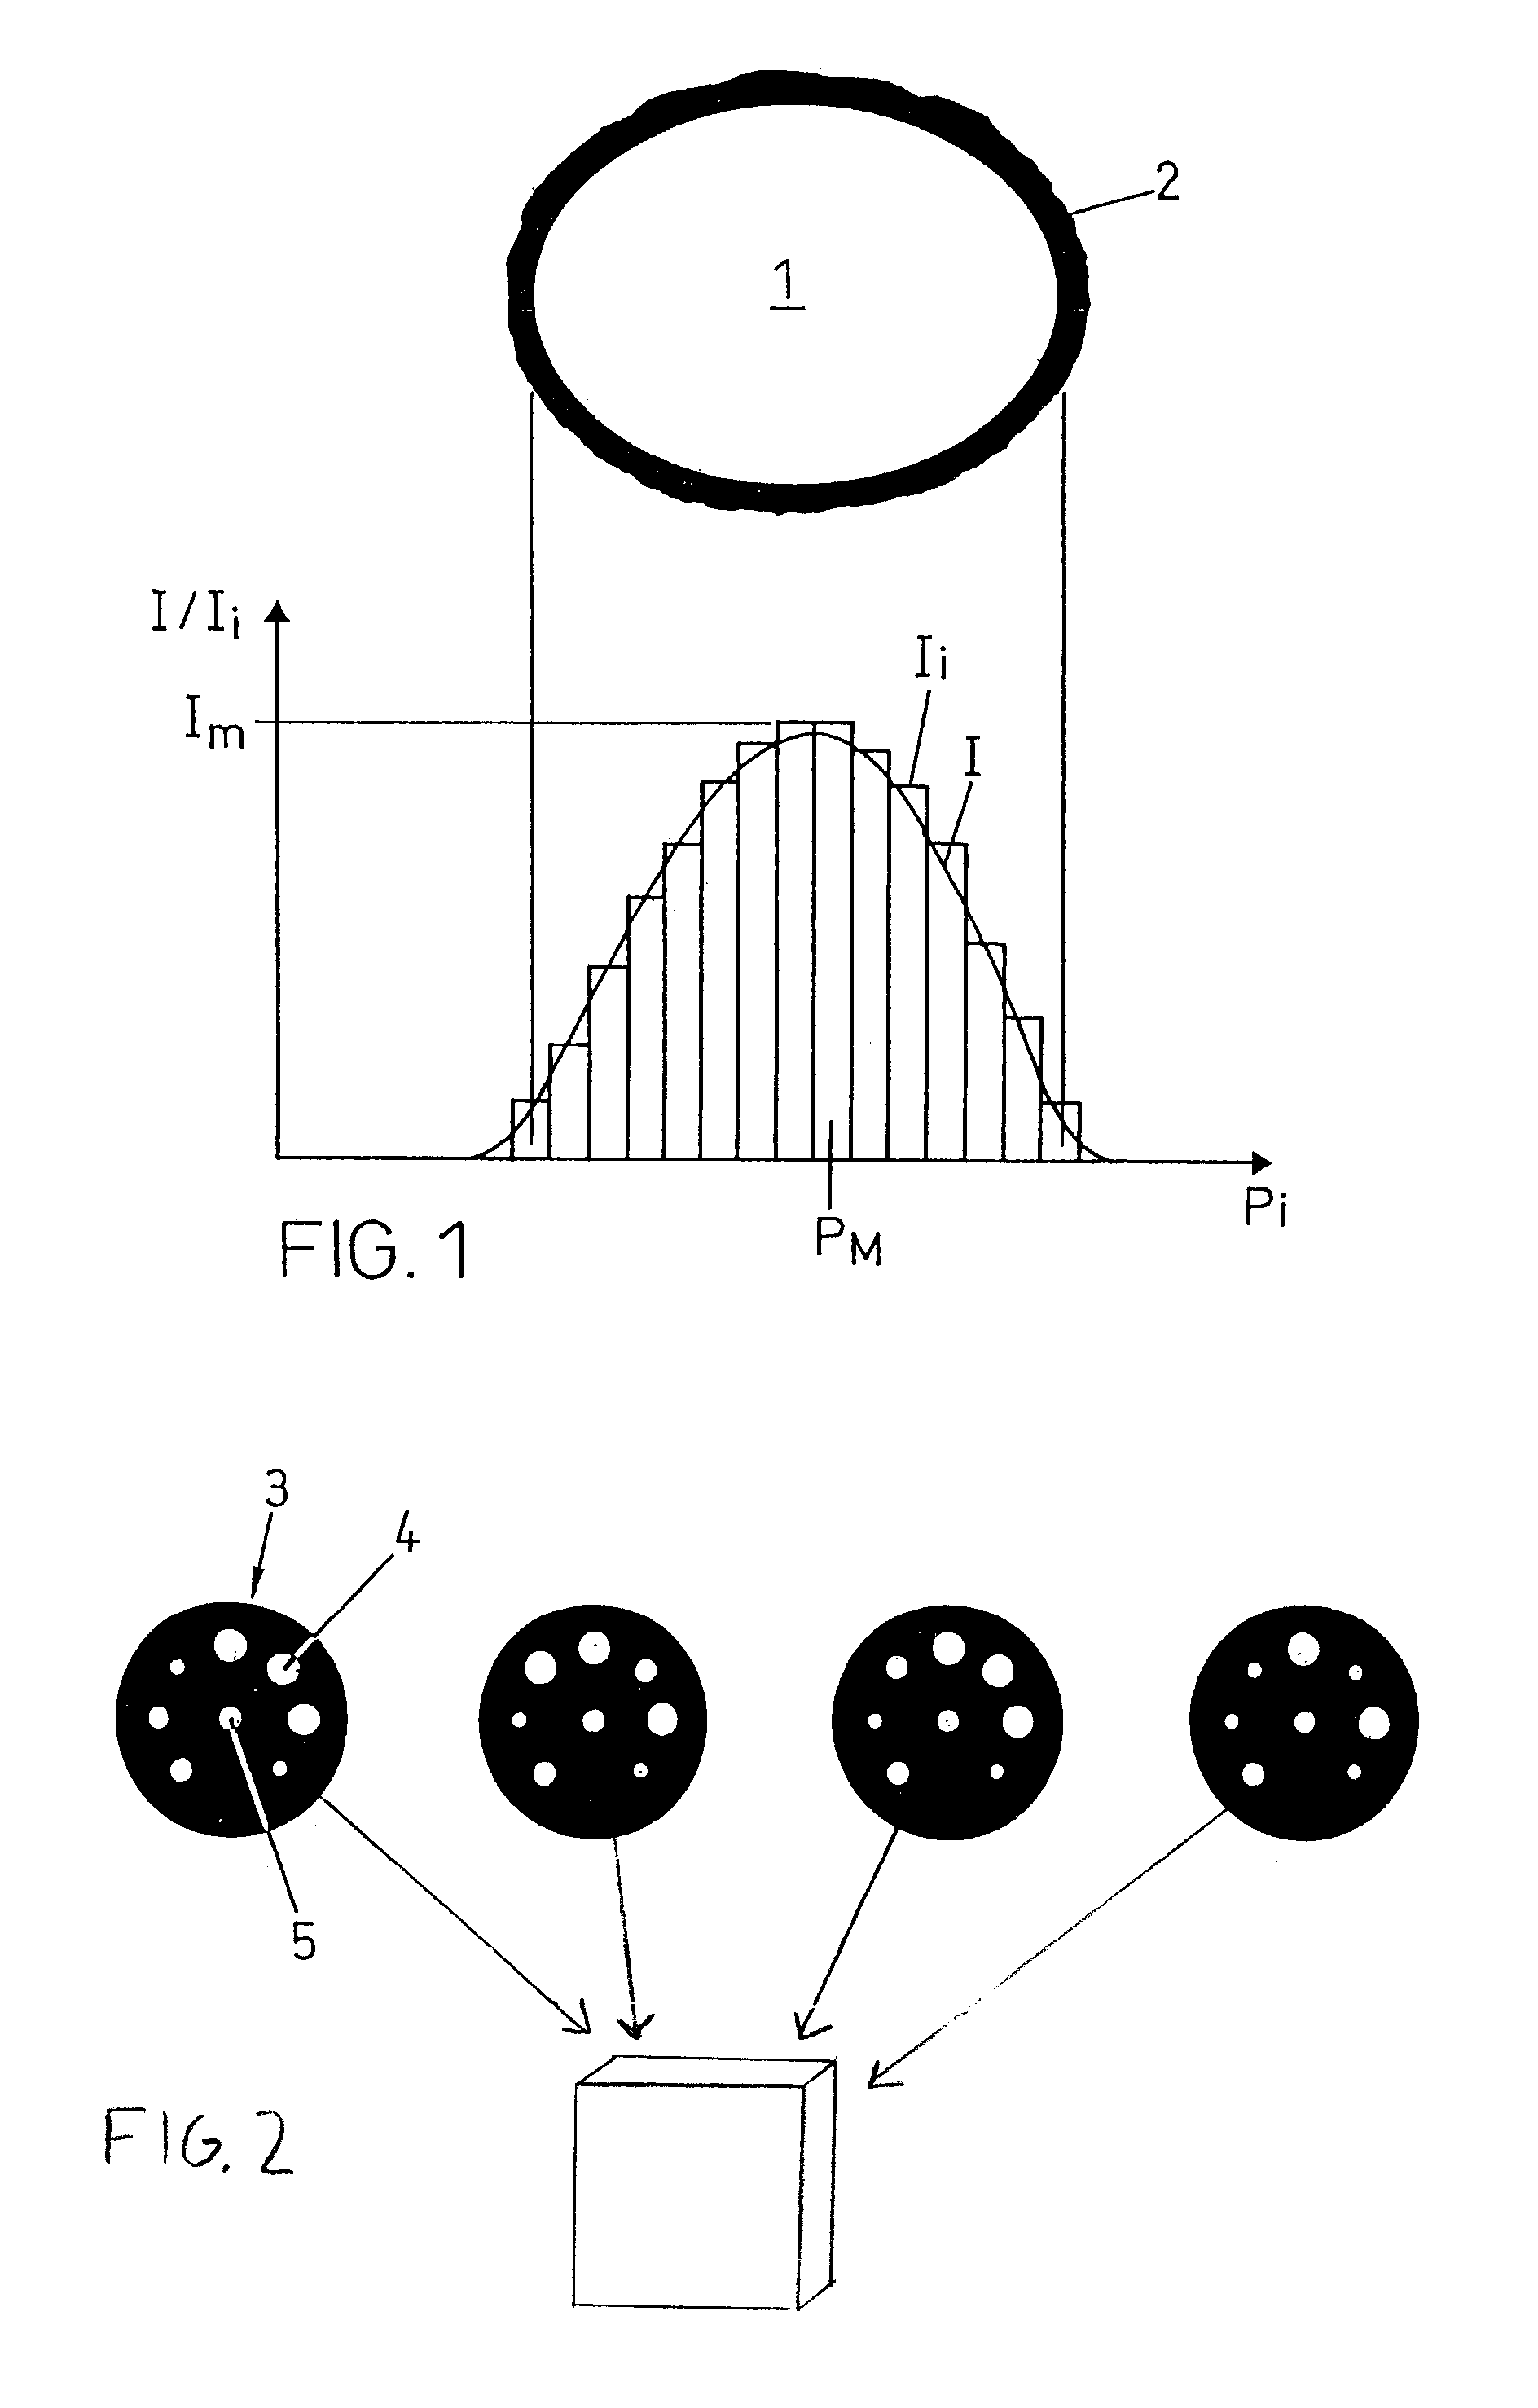 Method for identifying measuring points in an optical measuring system